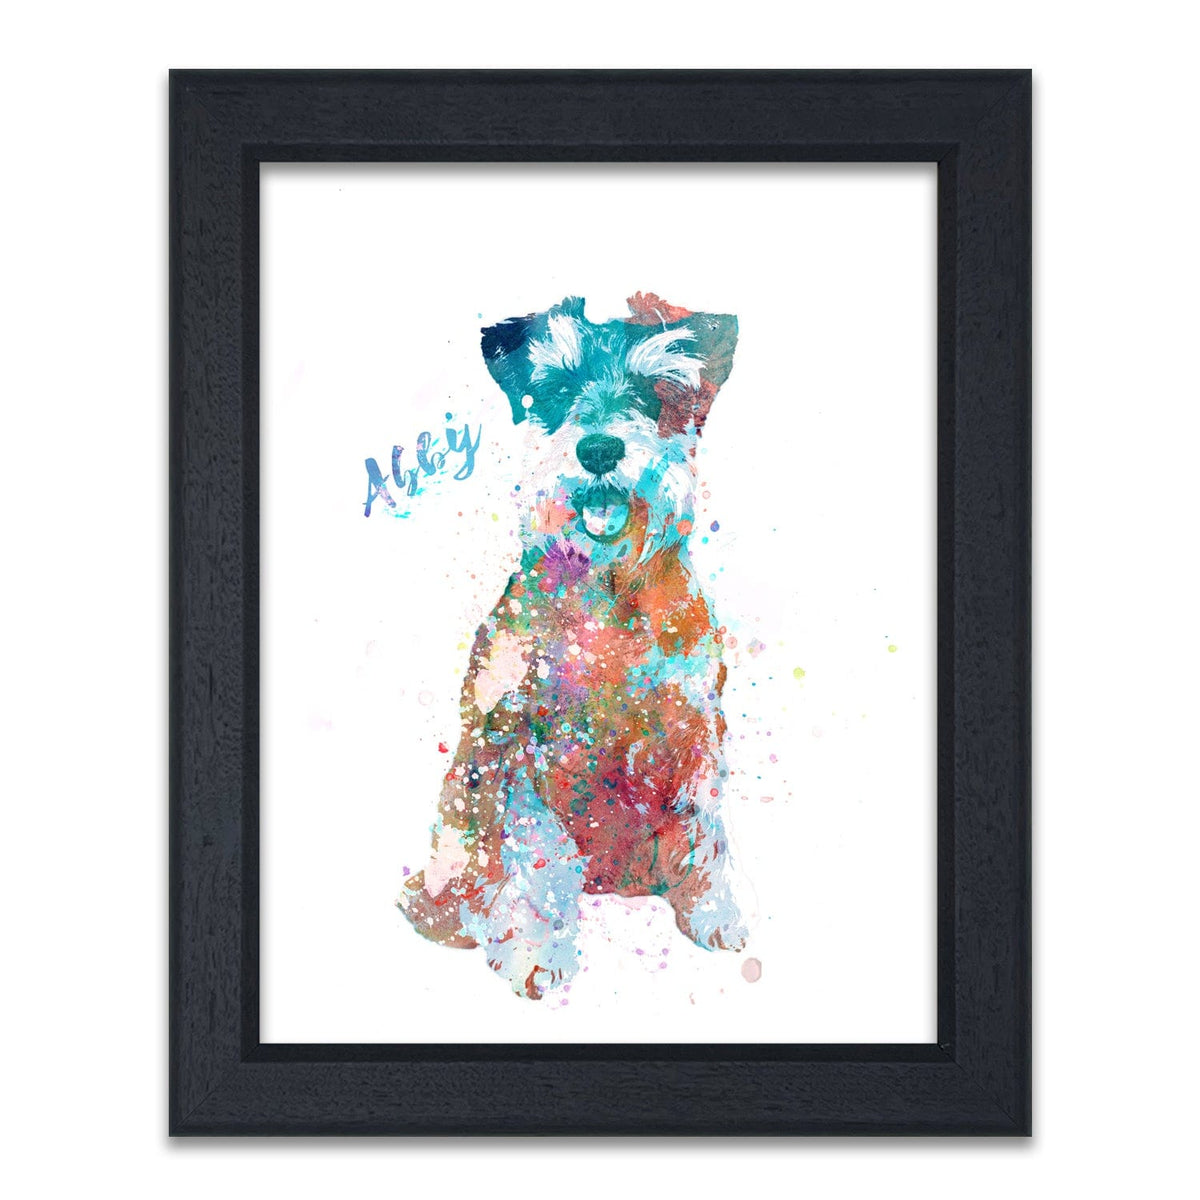 Framed Schnauzer Art - Personalized Pet Gift from Personal-Prints